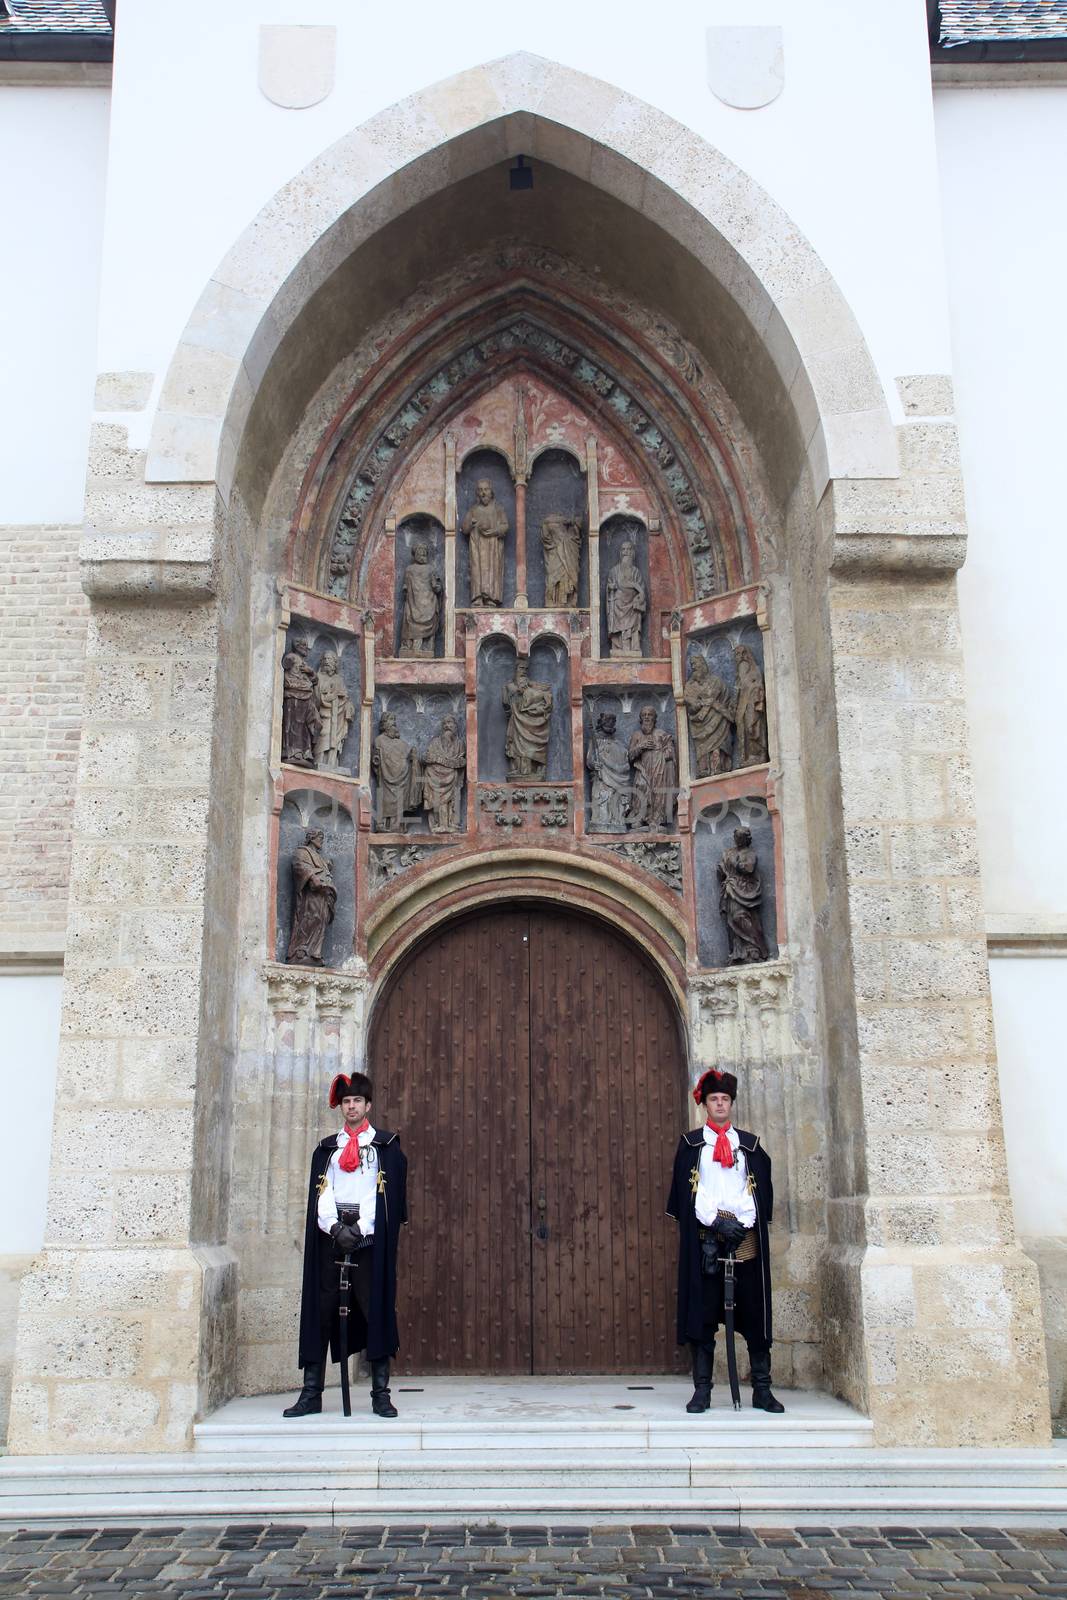 Guard of Honor of the Cravat Regiment on the south portal of the church of St. Mark in Zagreb, Croatia on September 20, 2014